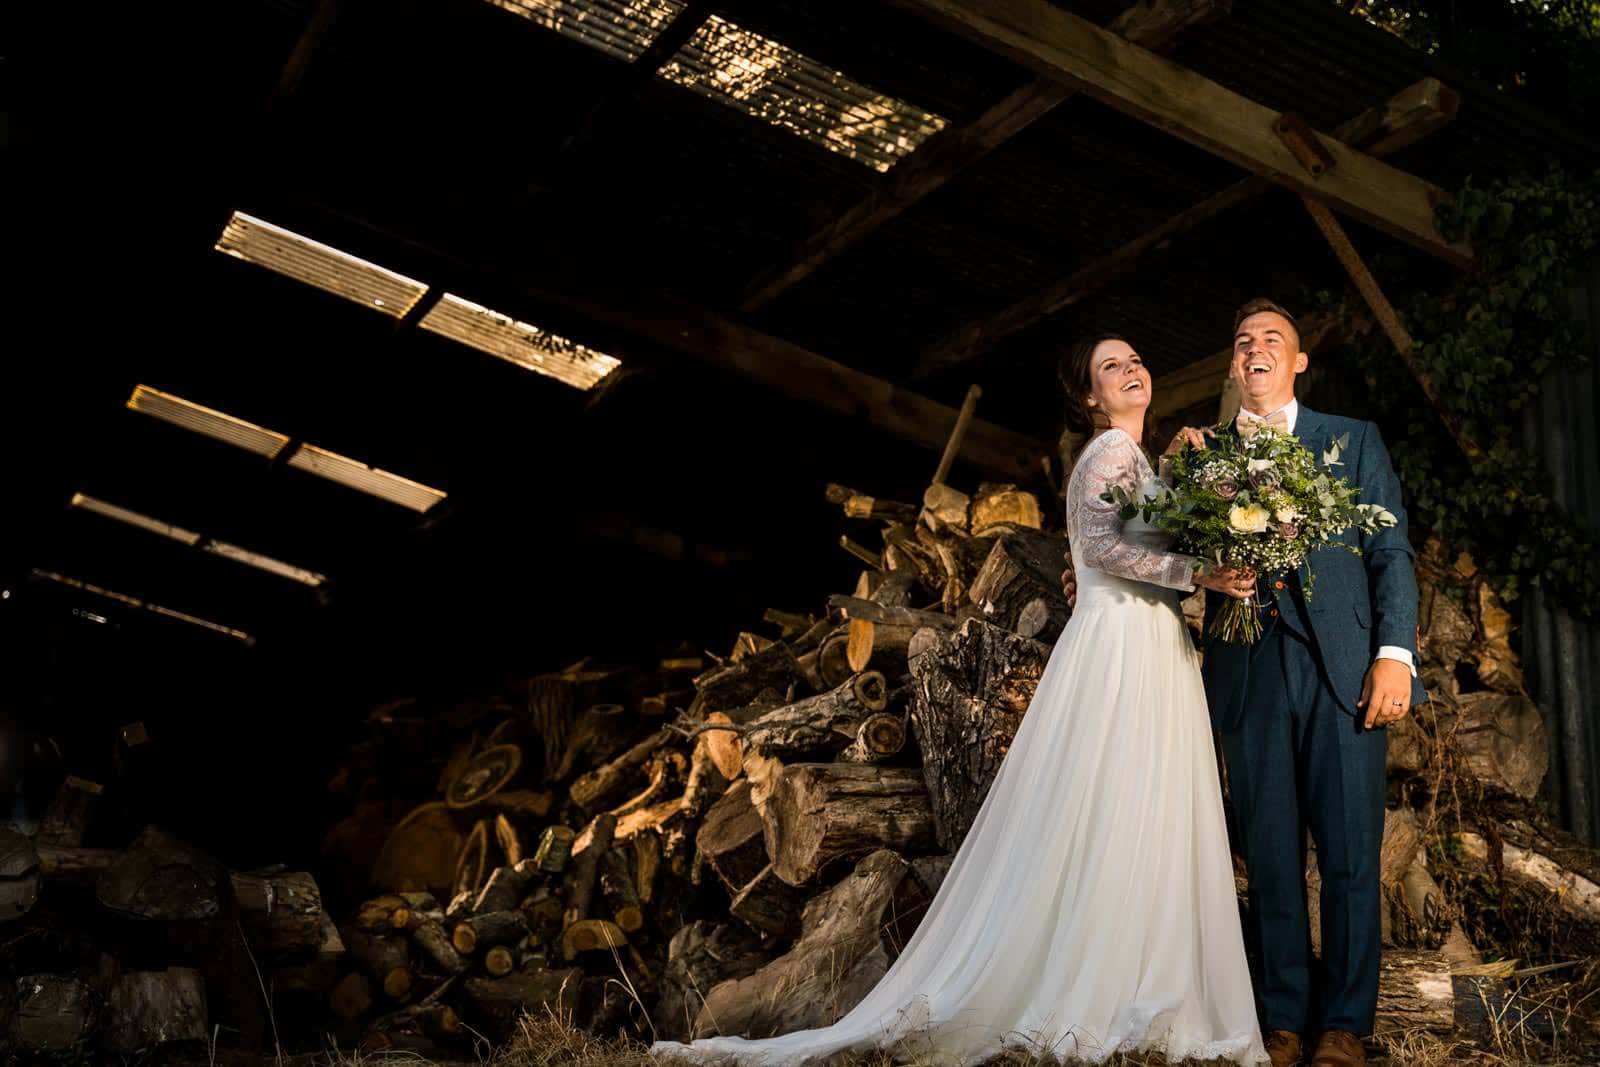 Bassmead wedding photography of couple standing in the wood store